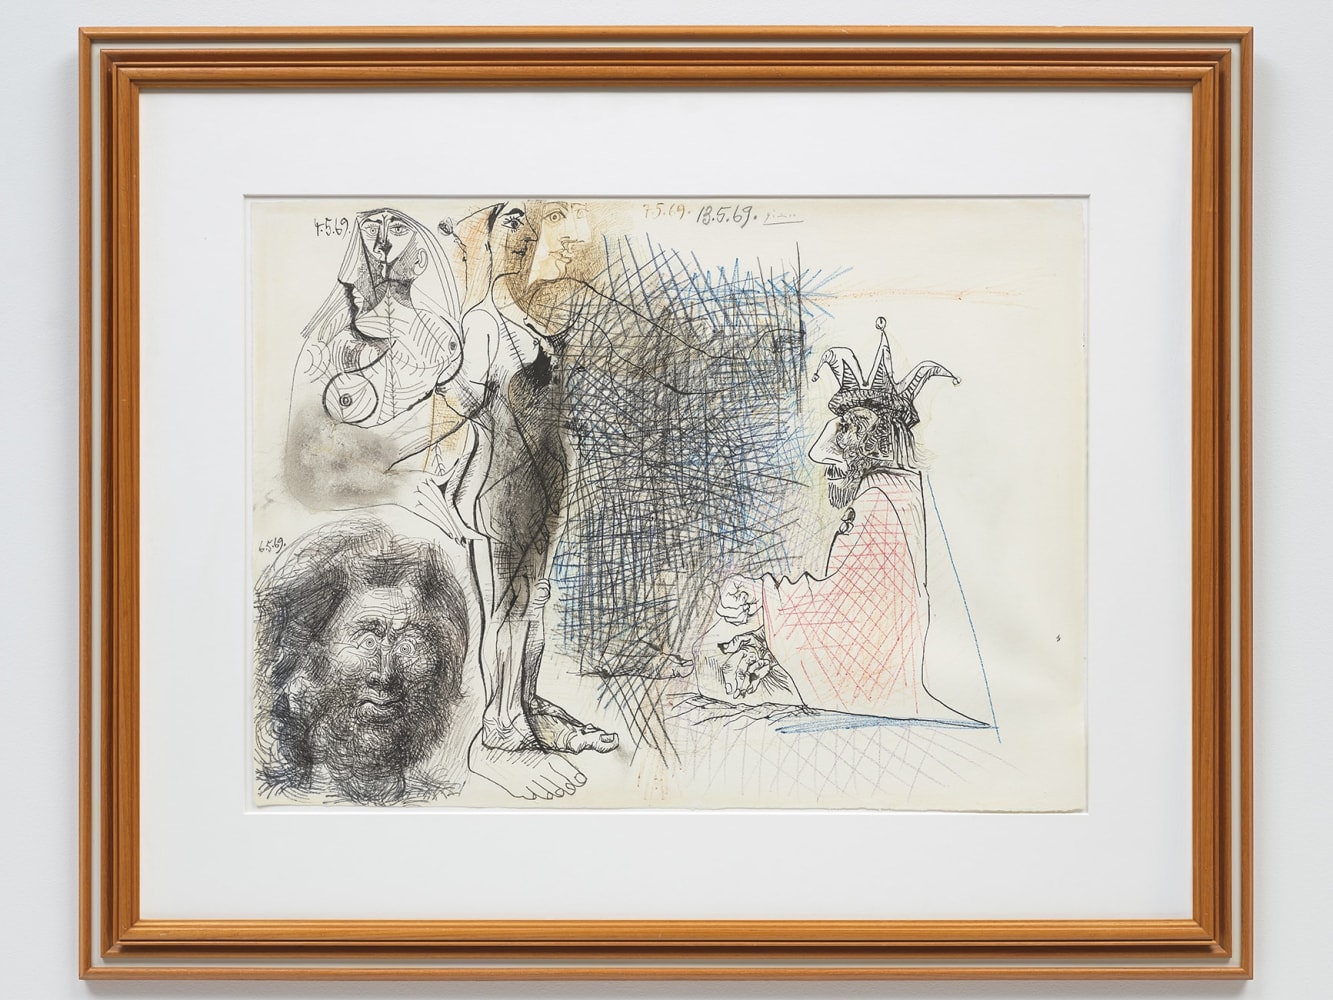 Pablo Picasso

Nus, T&amp;ecirc;te d&amp;#39;Homme et Personnage Assis

1969

ink and colored pencil on paper

23 x 31 1/2 inches (58.4 x 80 cm)&amp;nbsp;